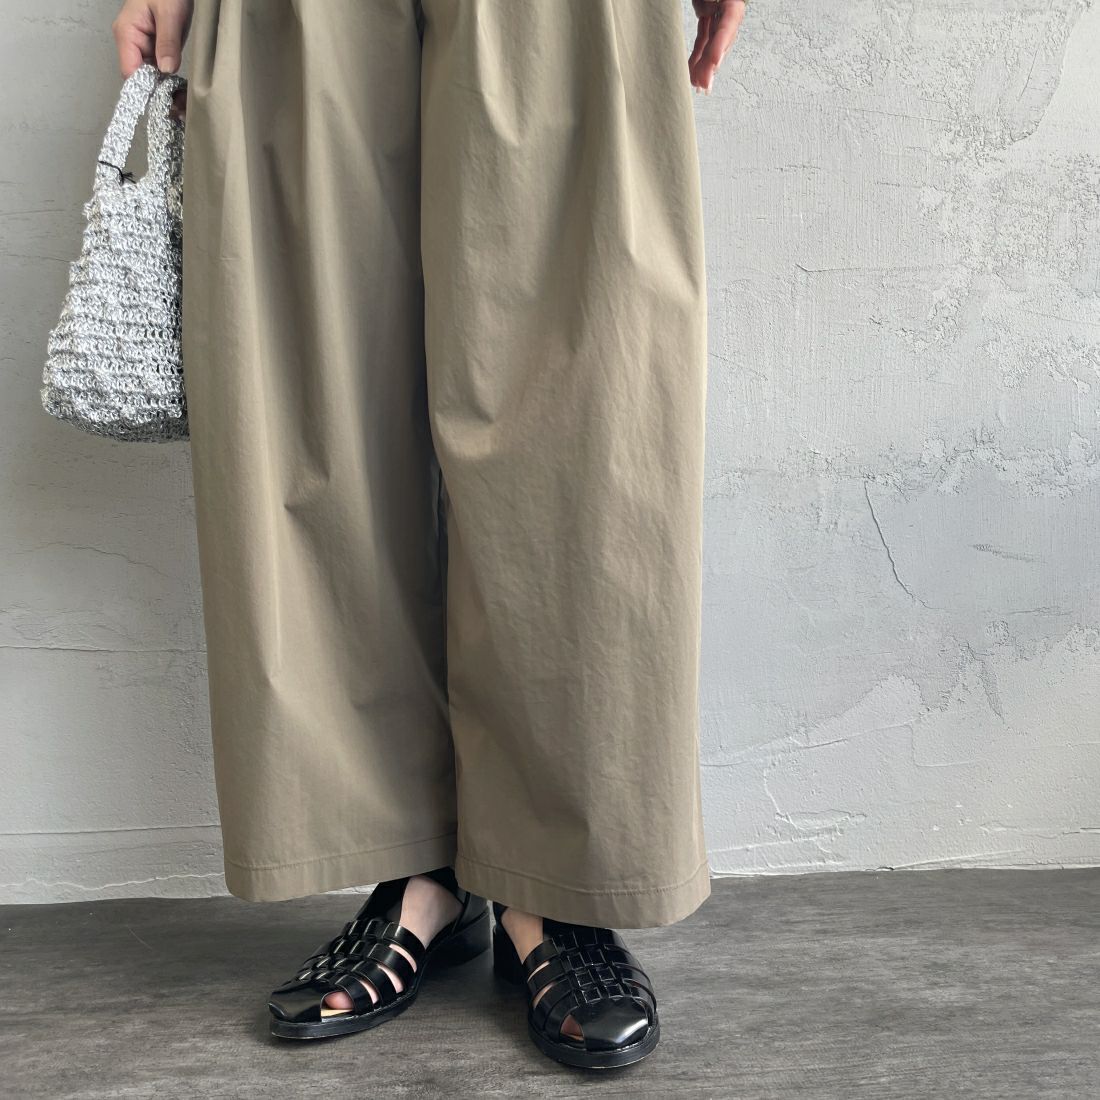 DANTON [ダントン] 2TUCK WIDE PANTS [DT-E0170CPY] TAUPE &&モデル身長：163cm 着用サイズ：36&&